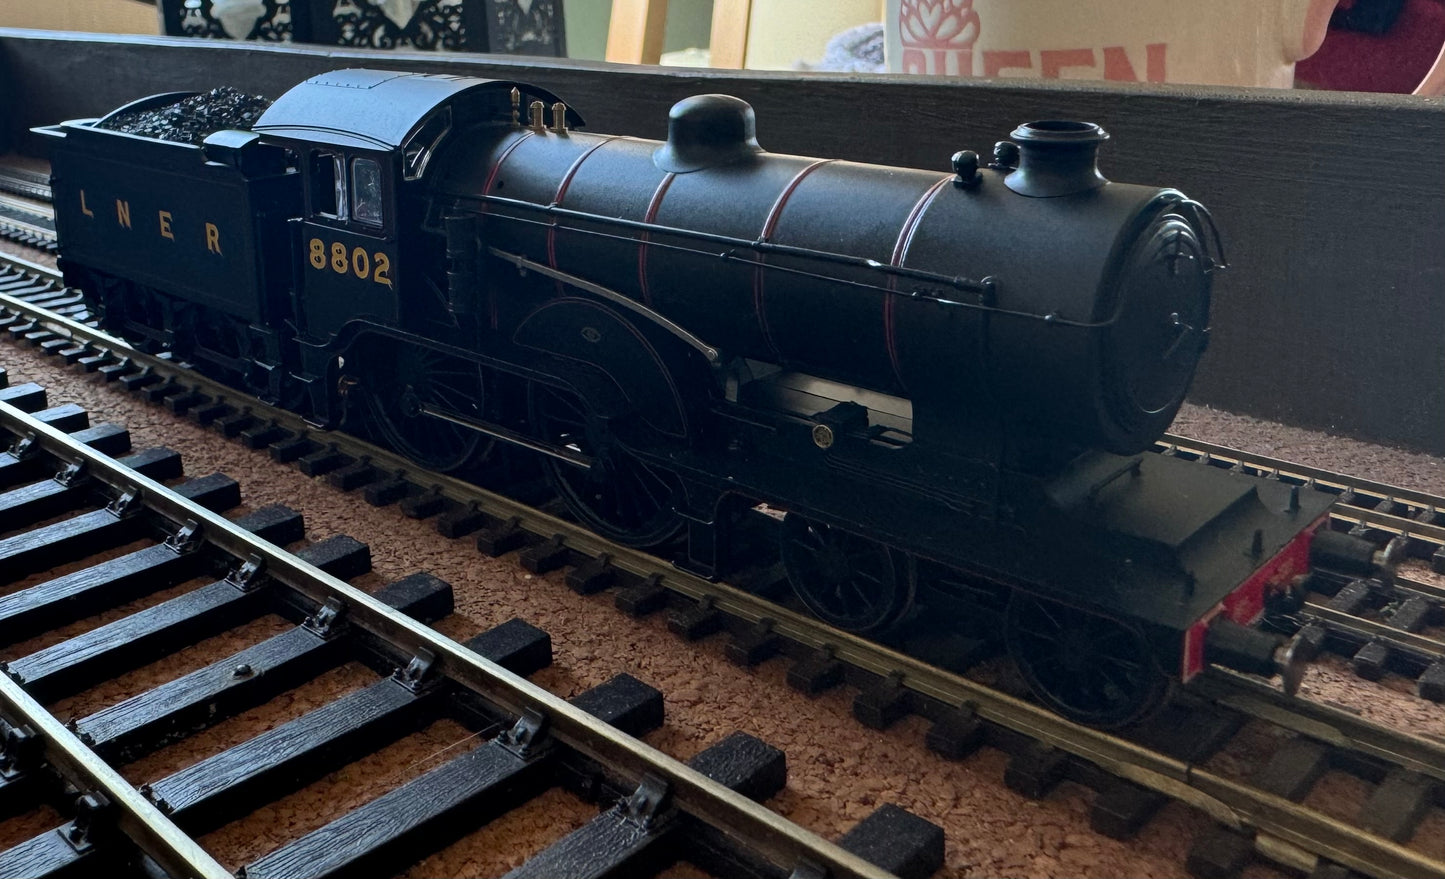 Hornby (OO) Ex GER, D16/3 “Super Claude” No.8802 in London North Eastern Railway, Lined Black. DCC Ready.